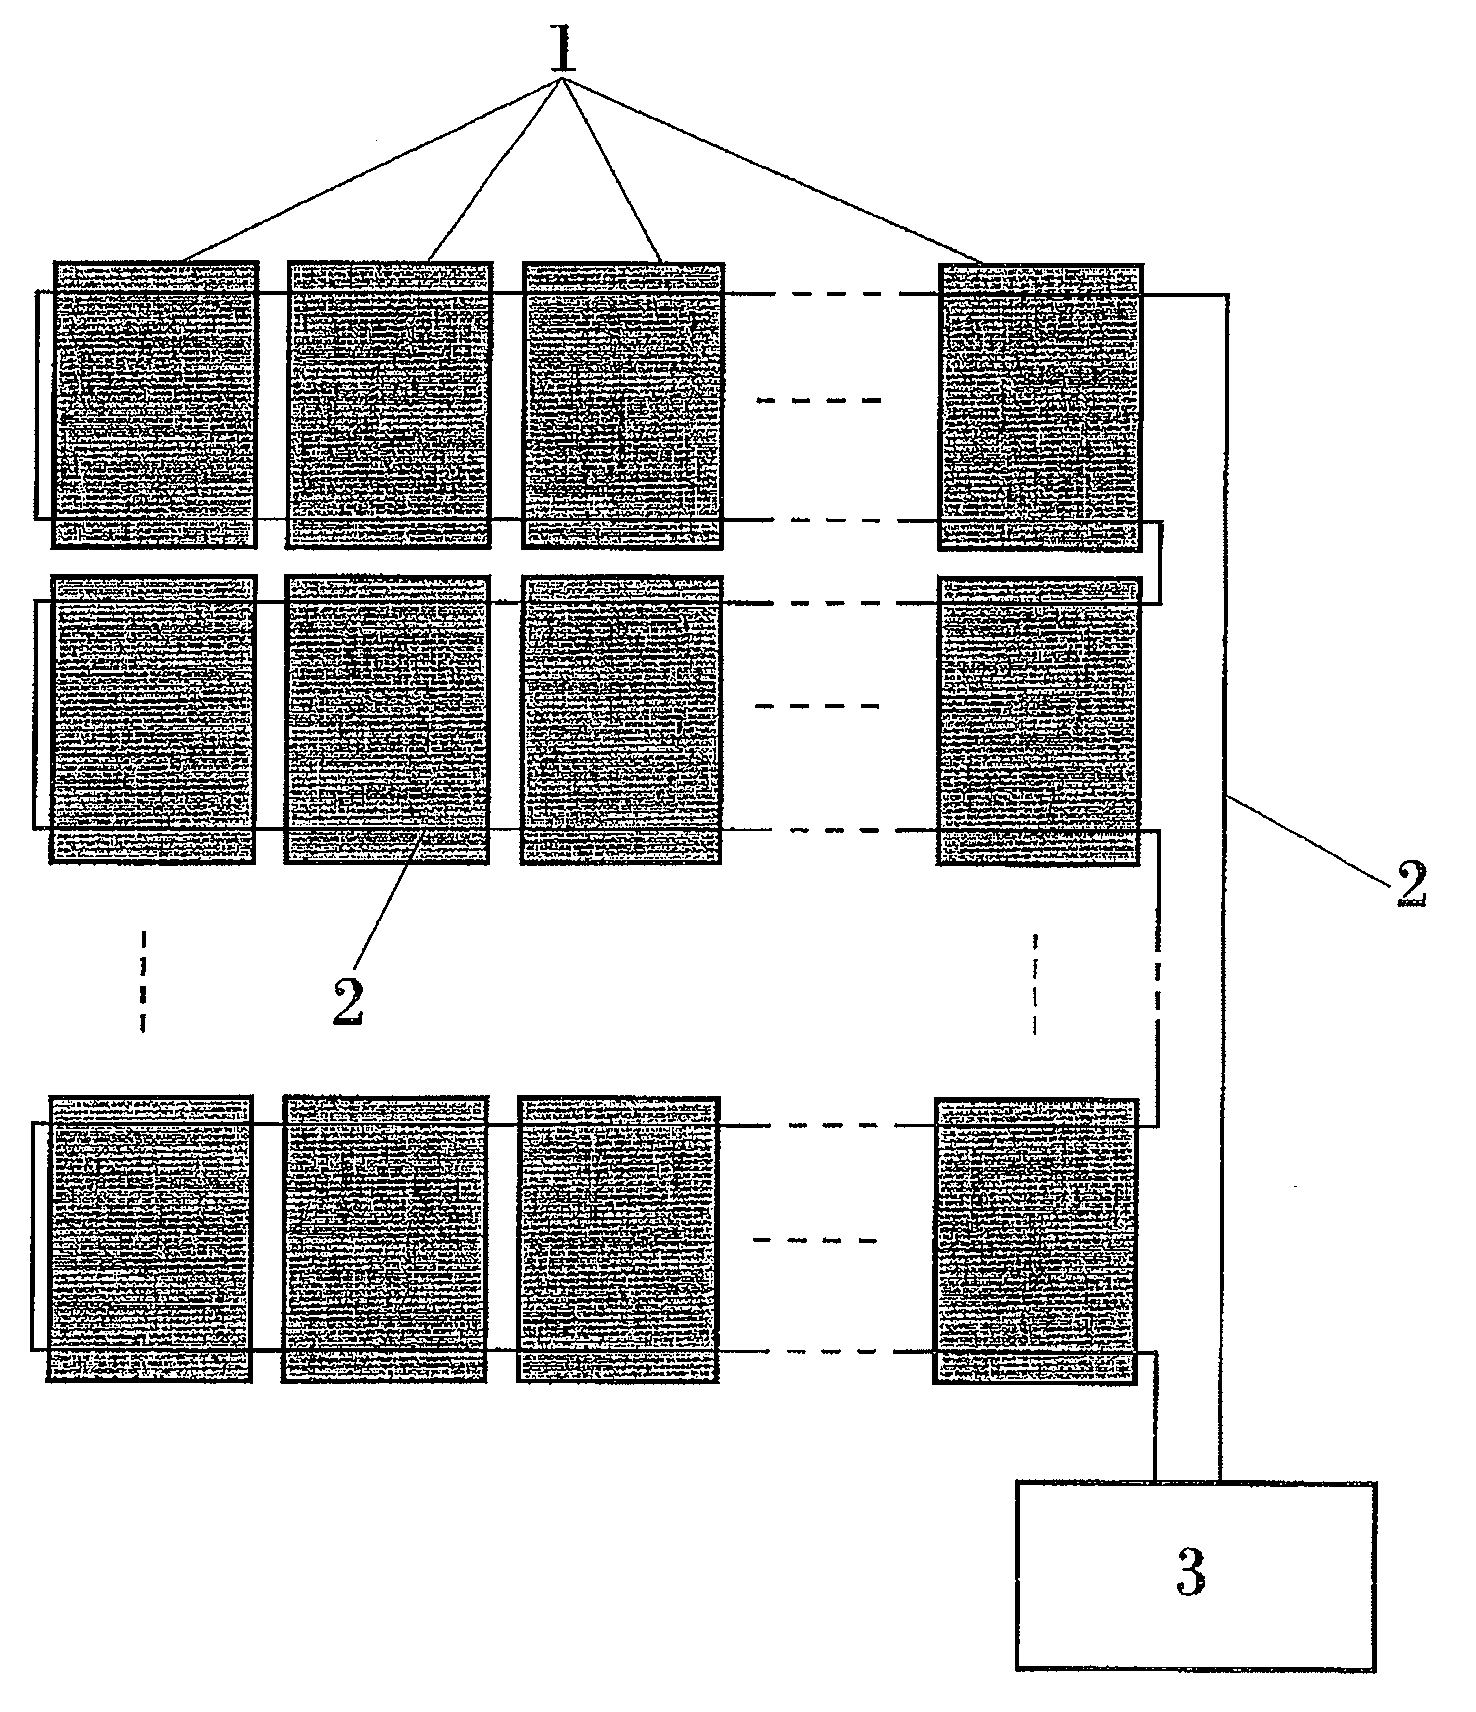 Anti-theft device for solar panels